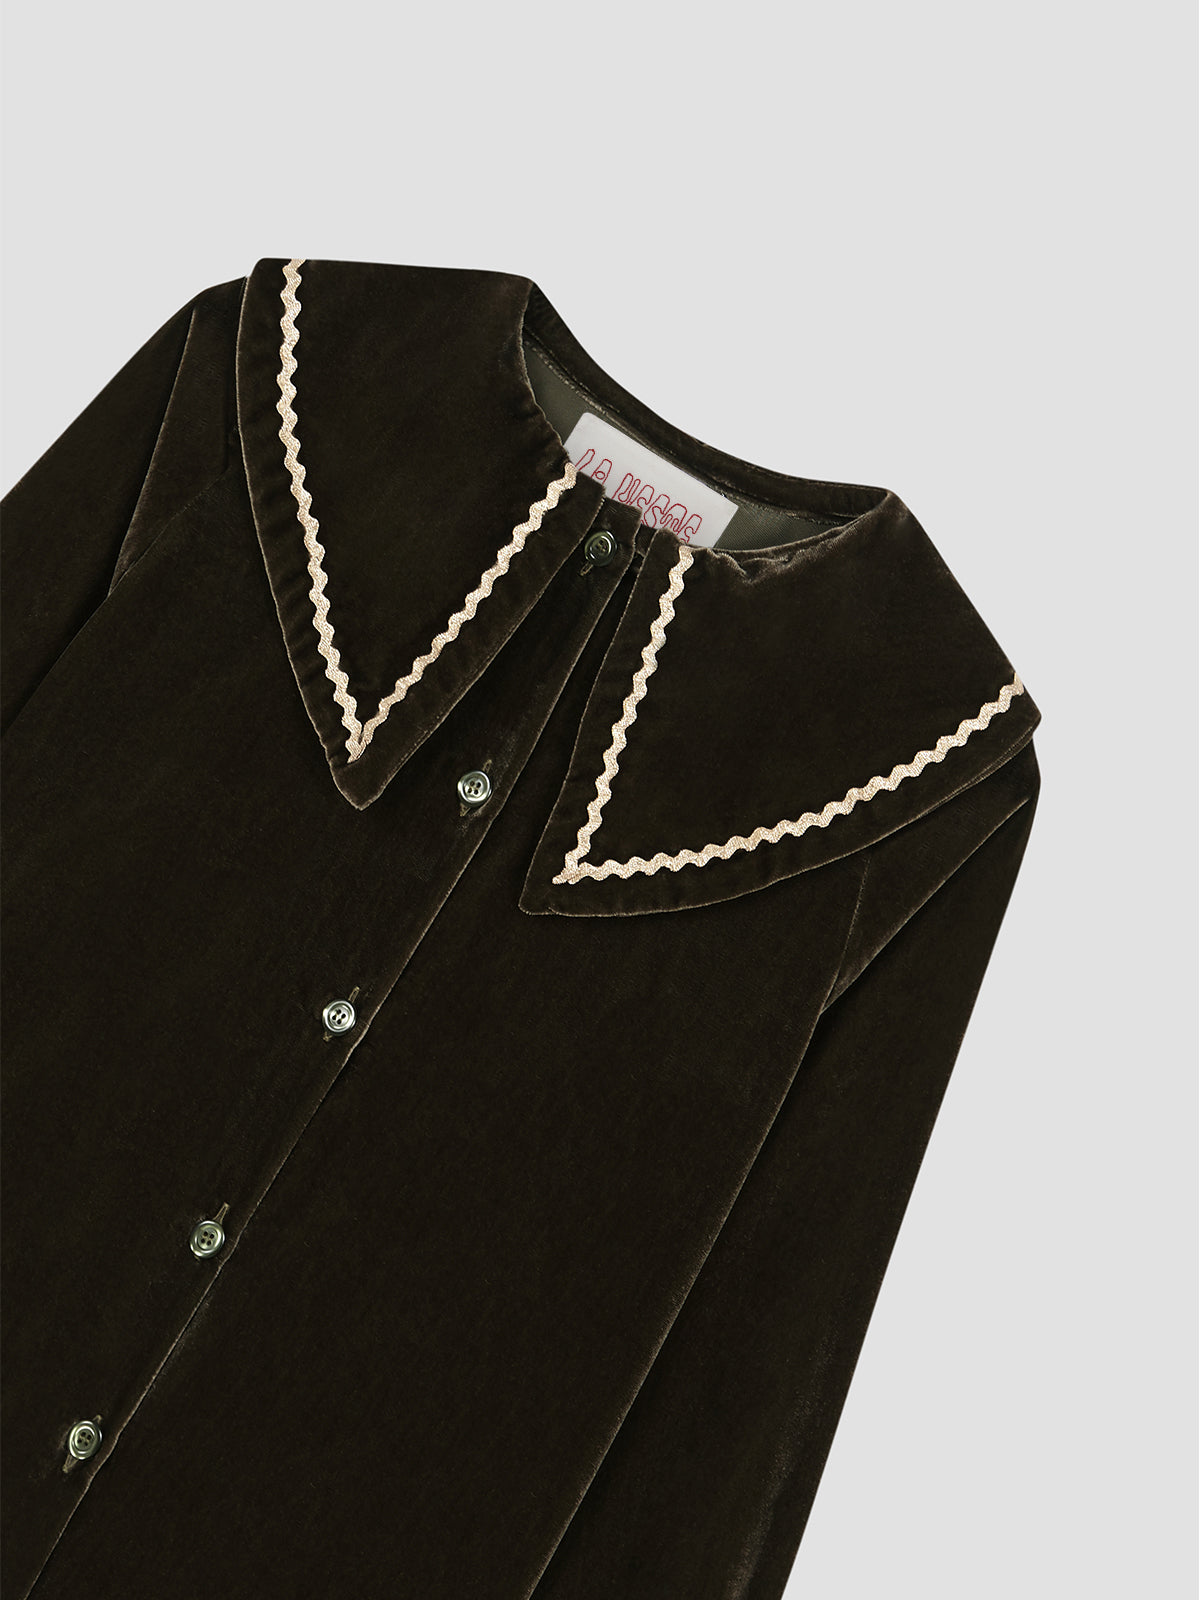 Green velvet shirt with large collar and trim detail